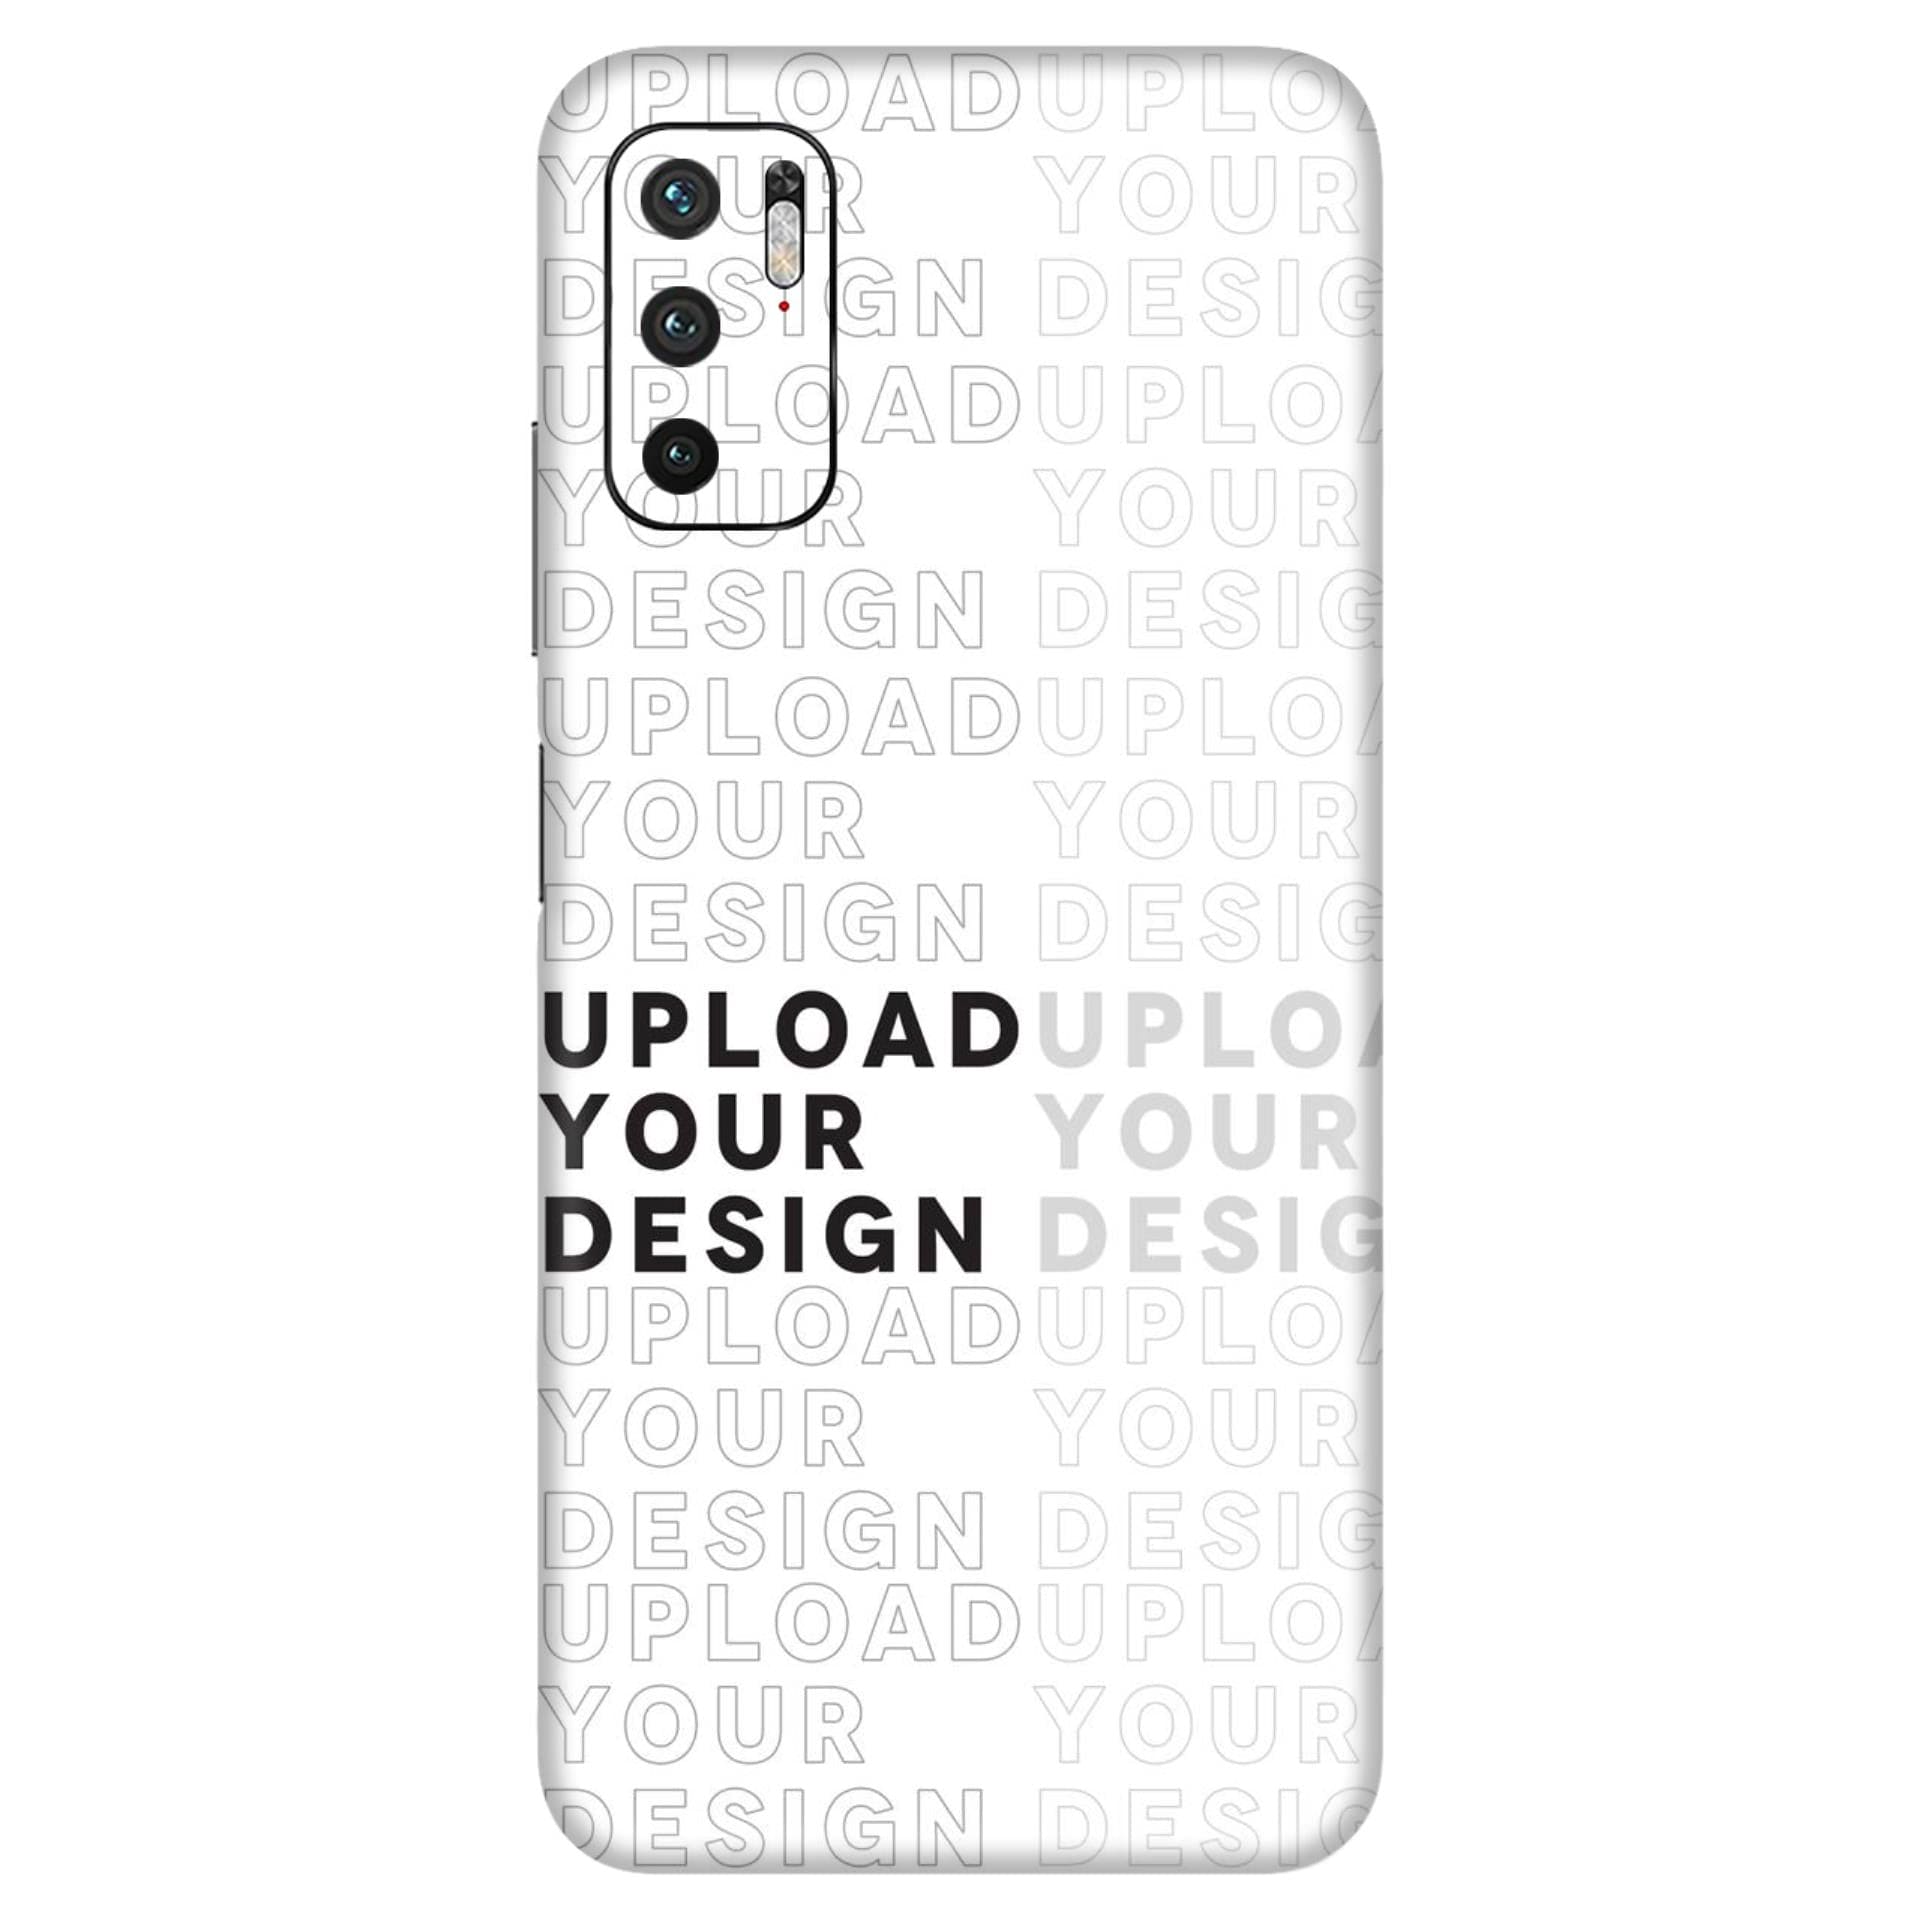 Redmi Note 10T UPLOAD YOUR OWN skins